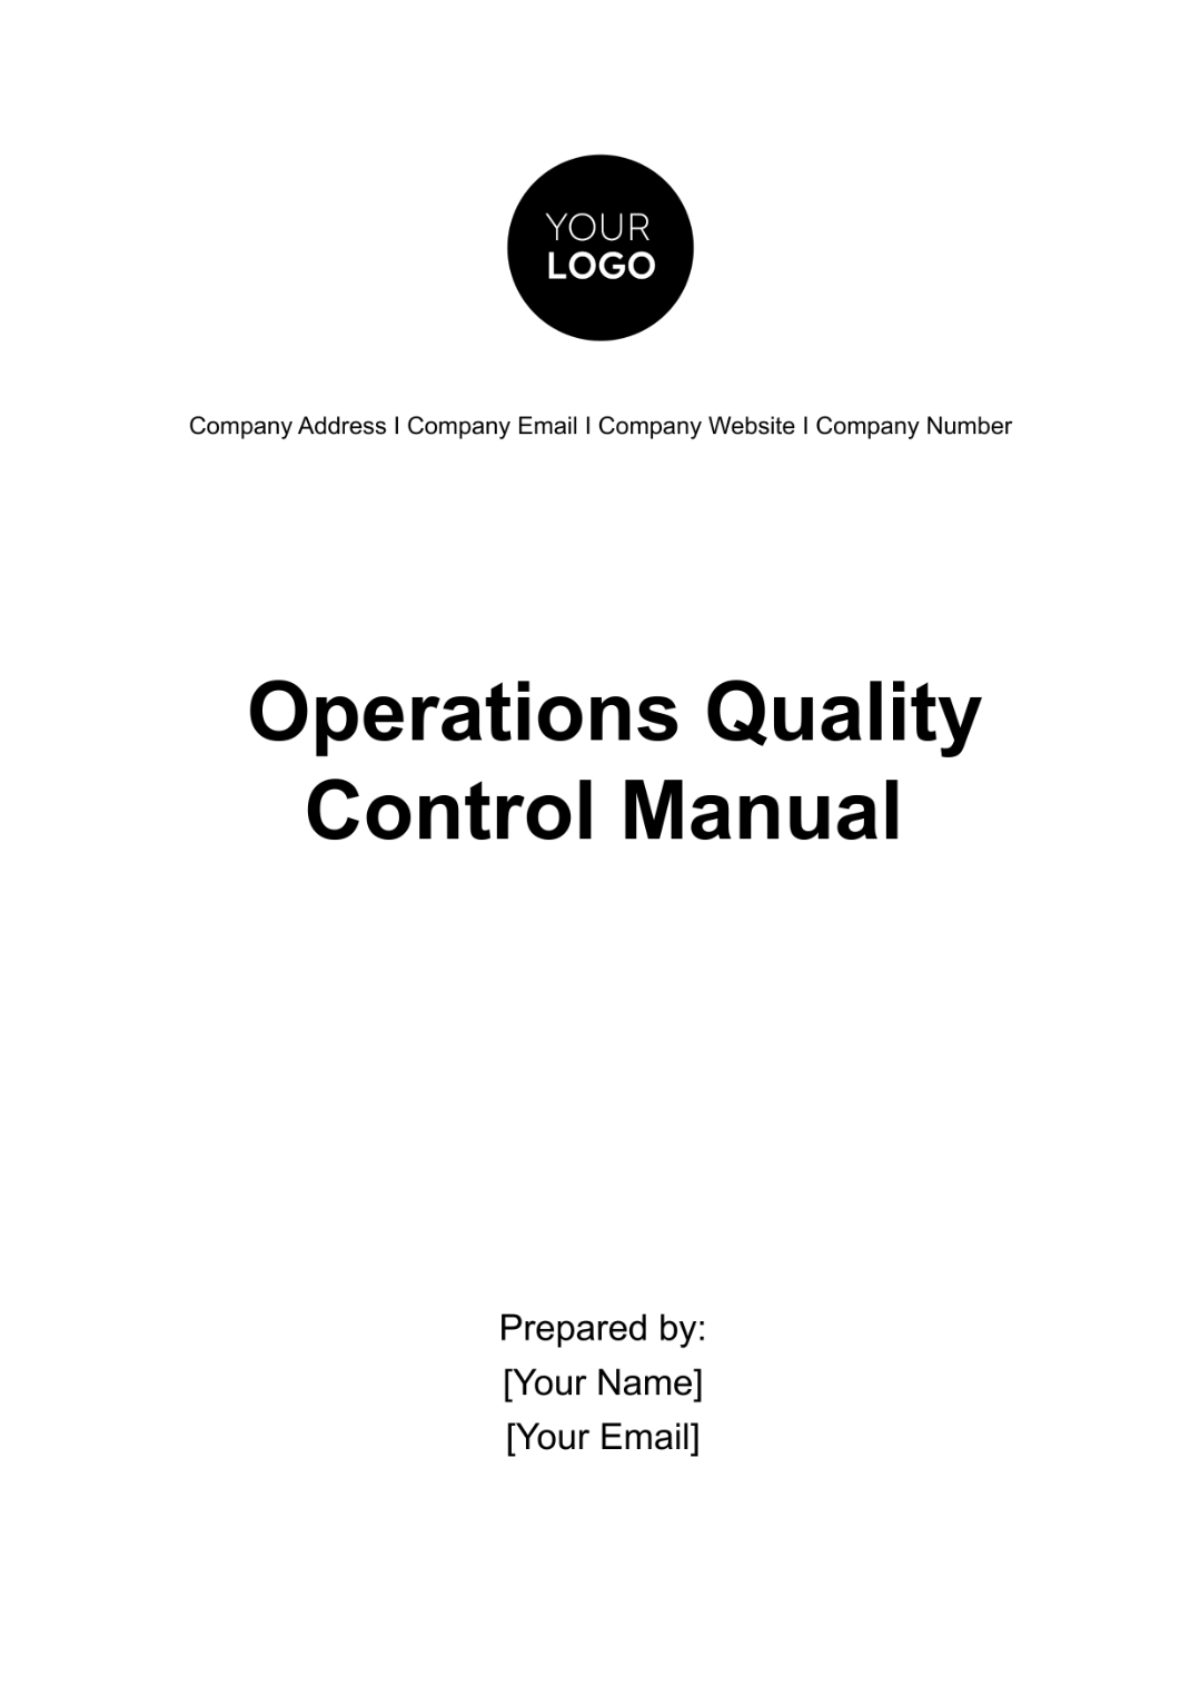 Operations Quality Control Manual Template